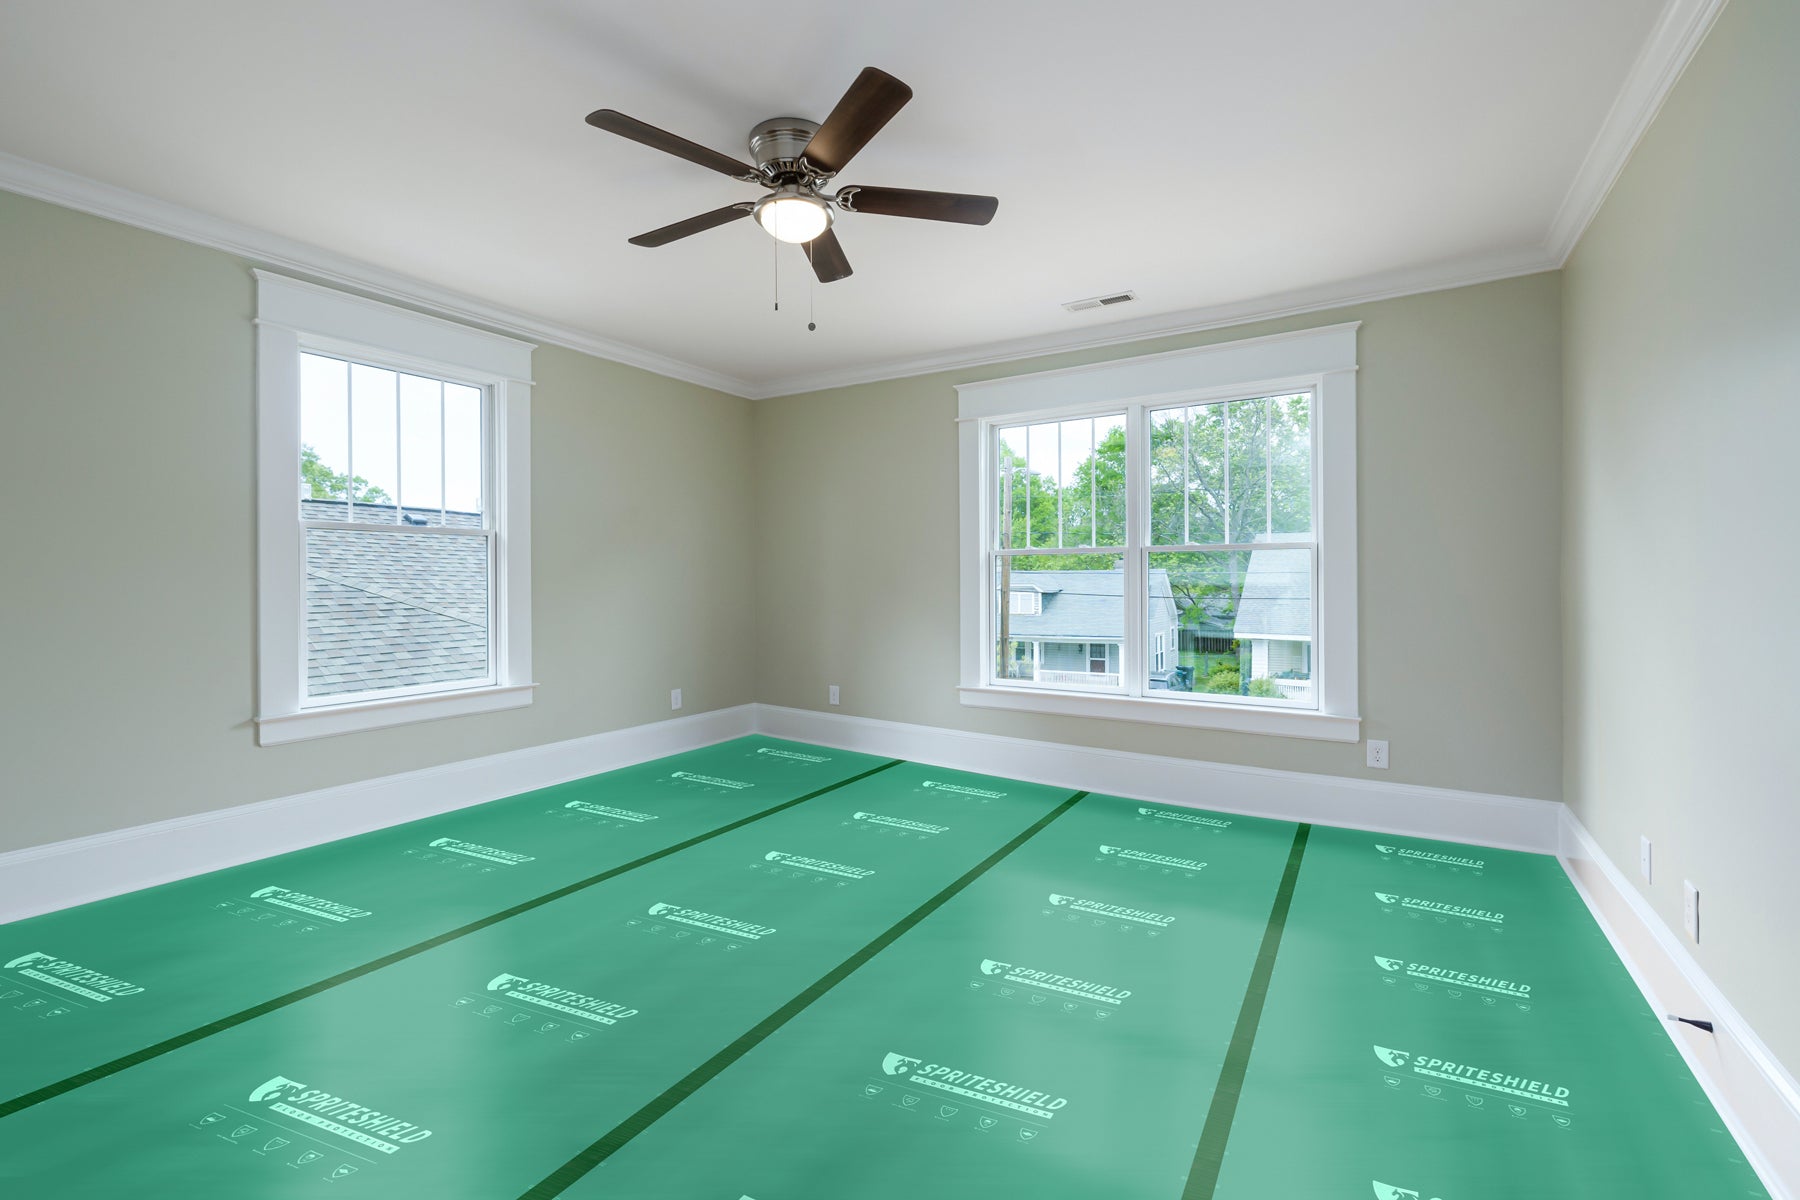 7 Ways to Protect Flooring During Construction and Renovation (2022)